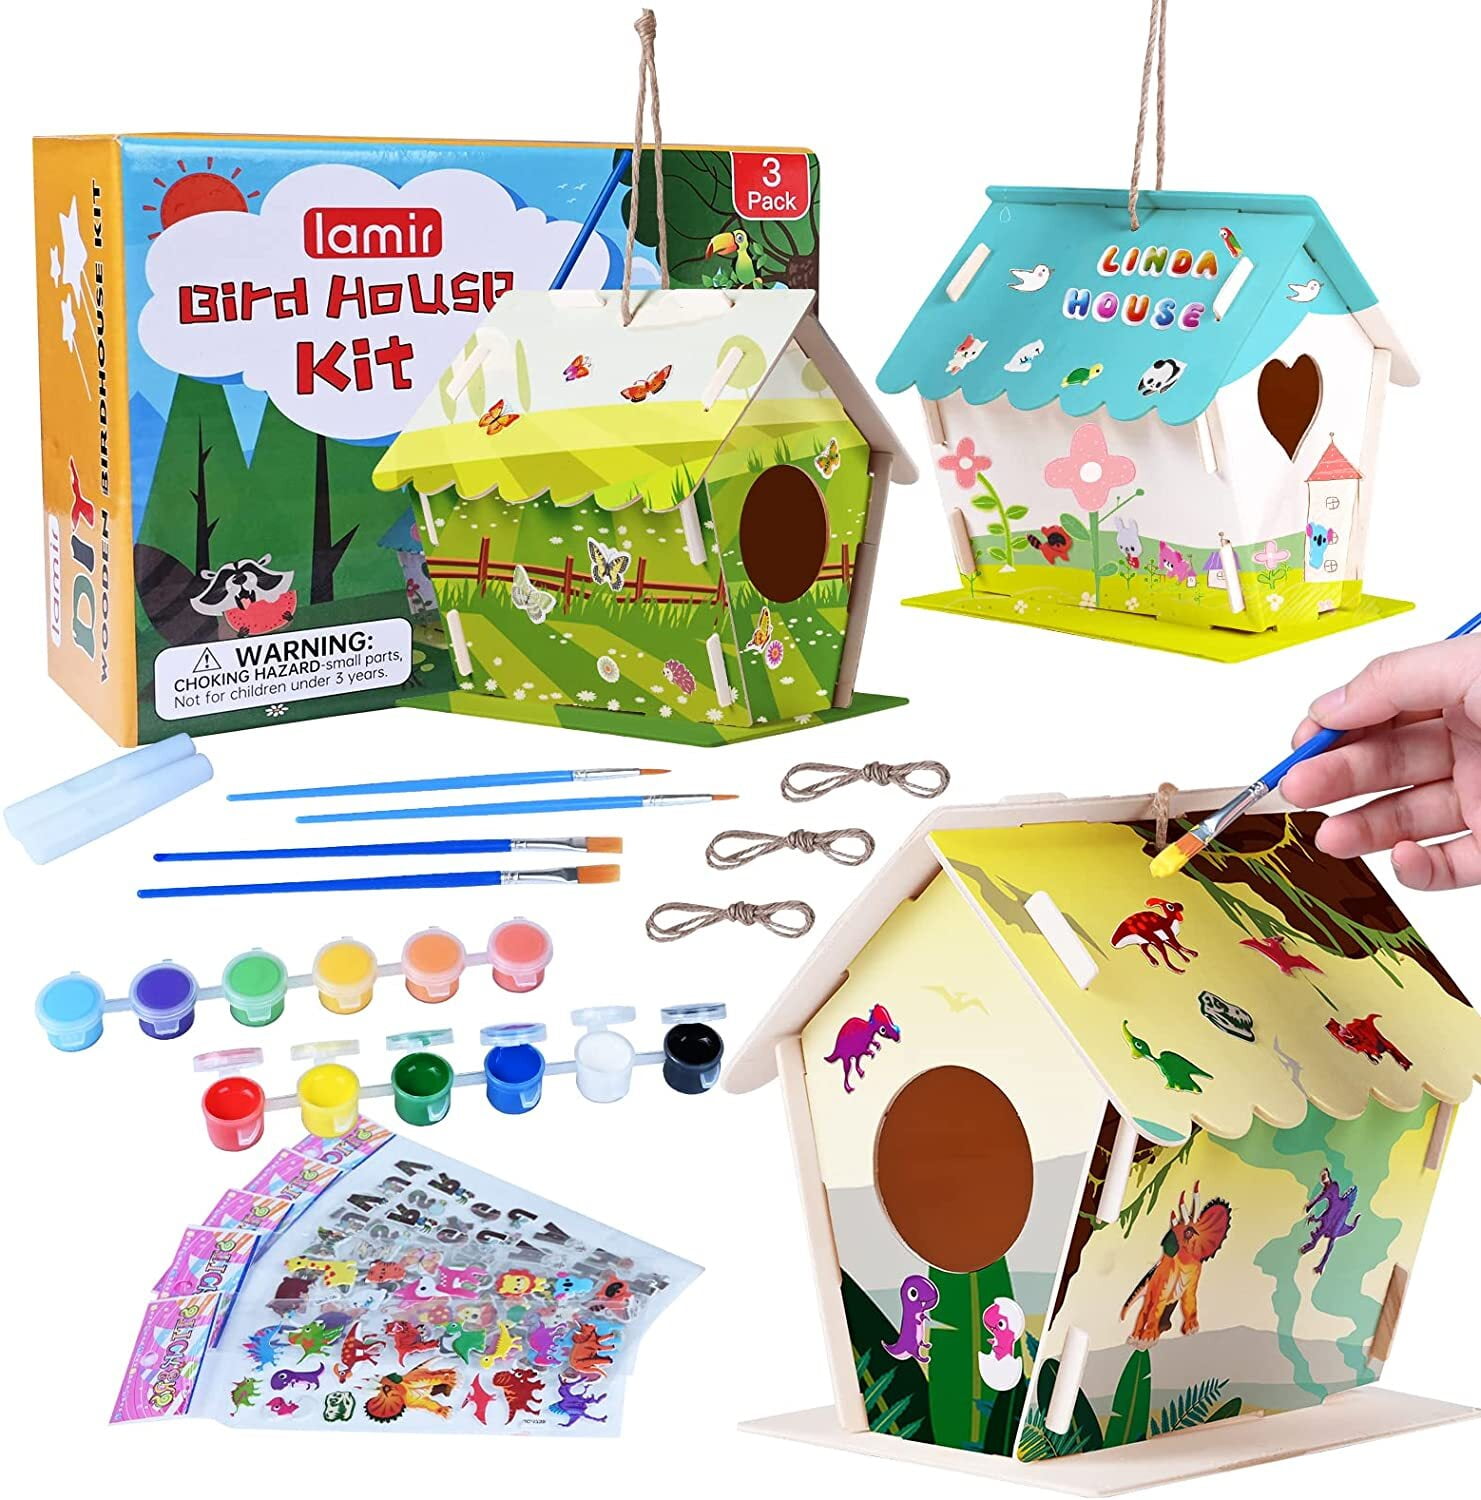 PERFECT FOR EASTER BASKETS Build Your Own My Window Birdhouse KIT USA MADE! 